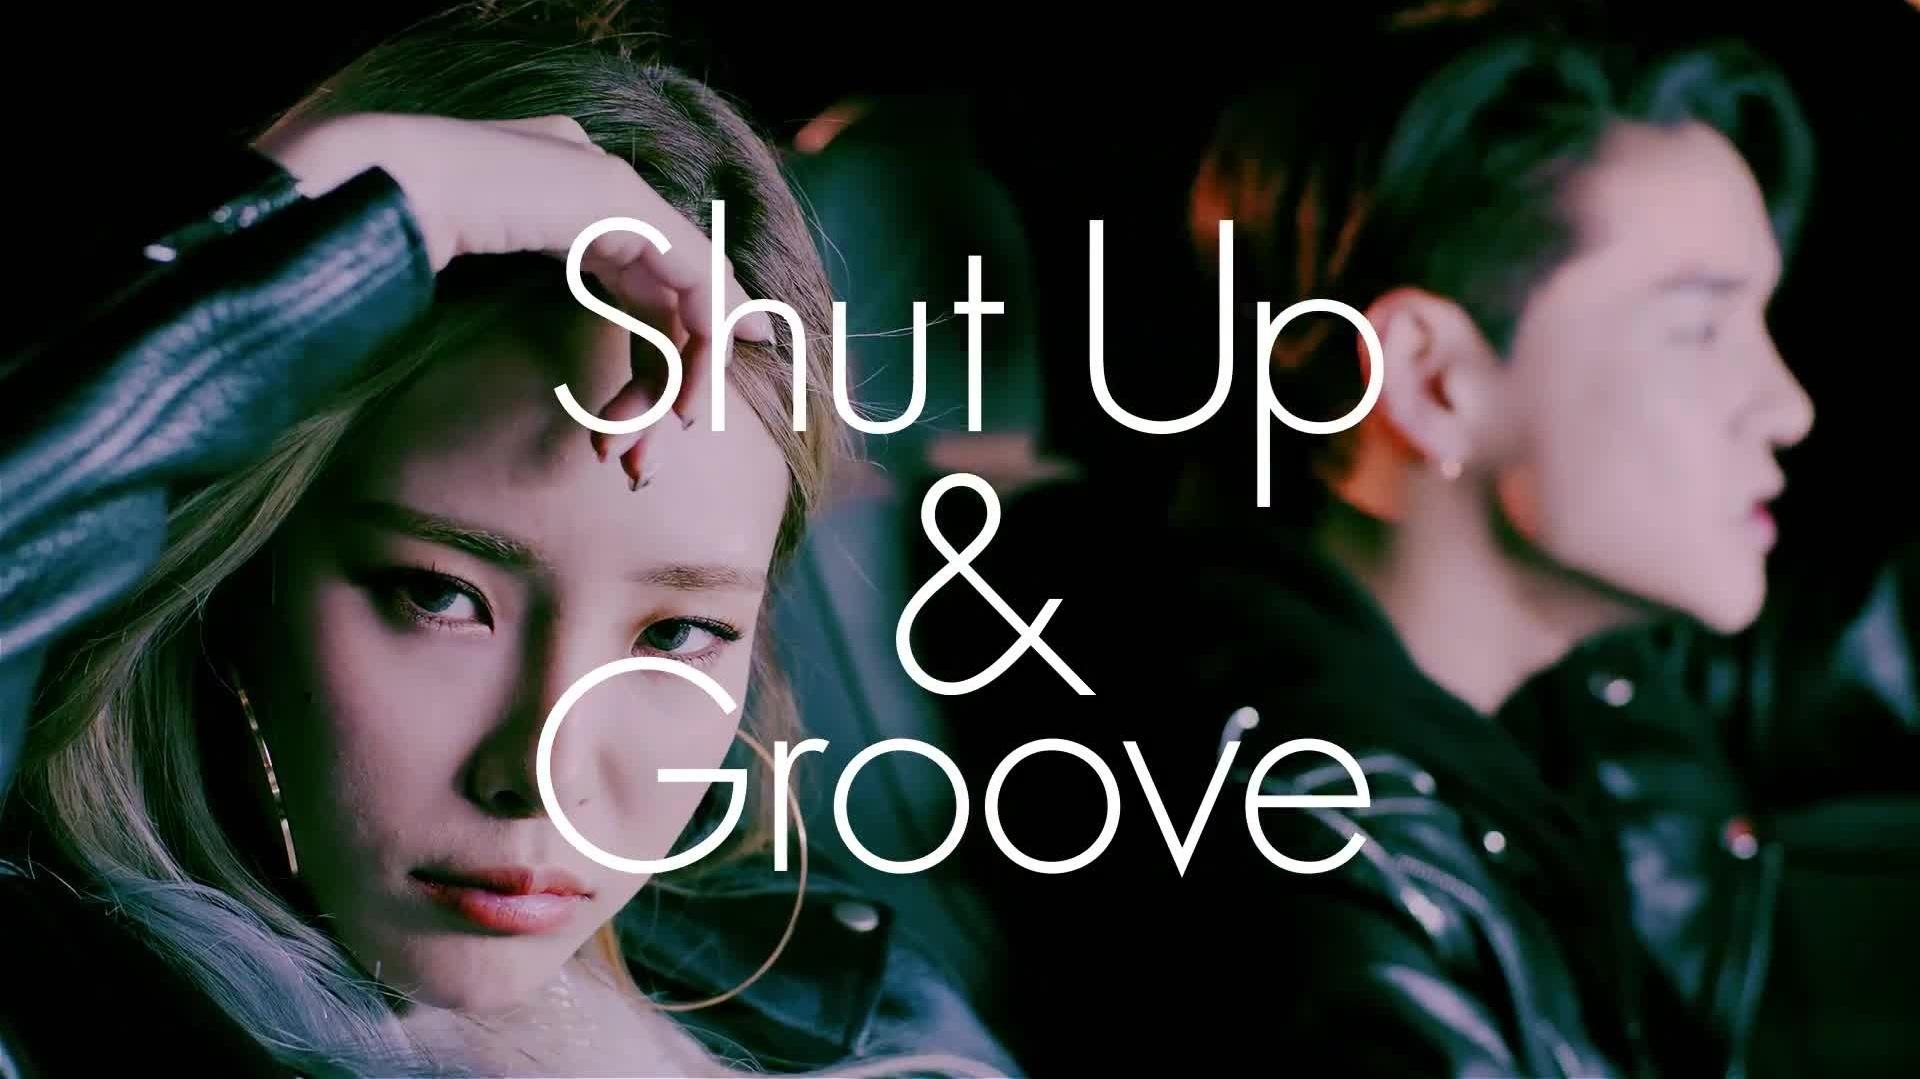 Heize - Shut Up And Groove 预告